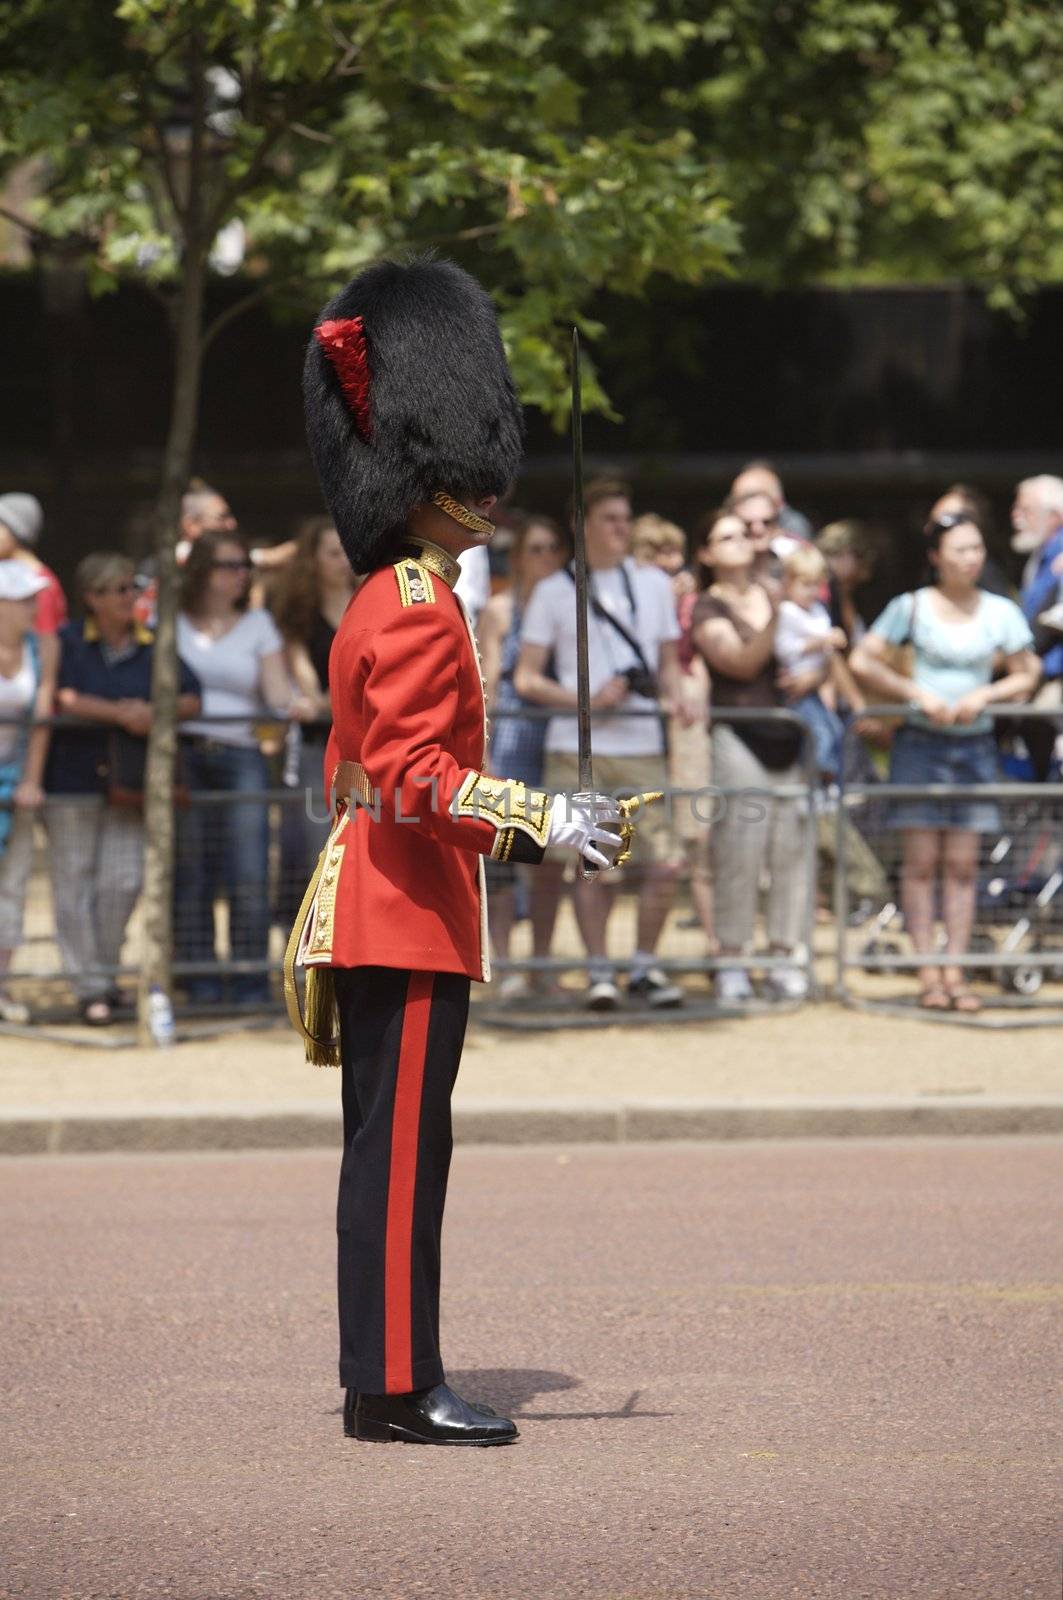 The Trooping of the Colors icon the Queen's Birthday one of London's most popular annual pageants